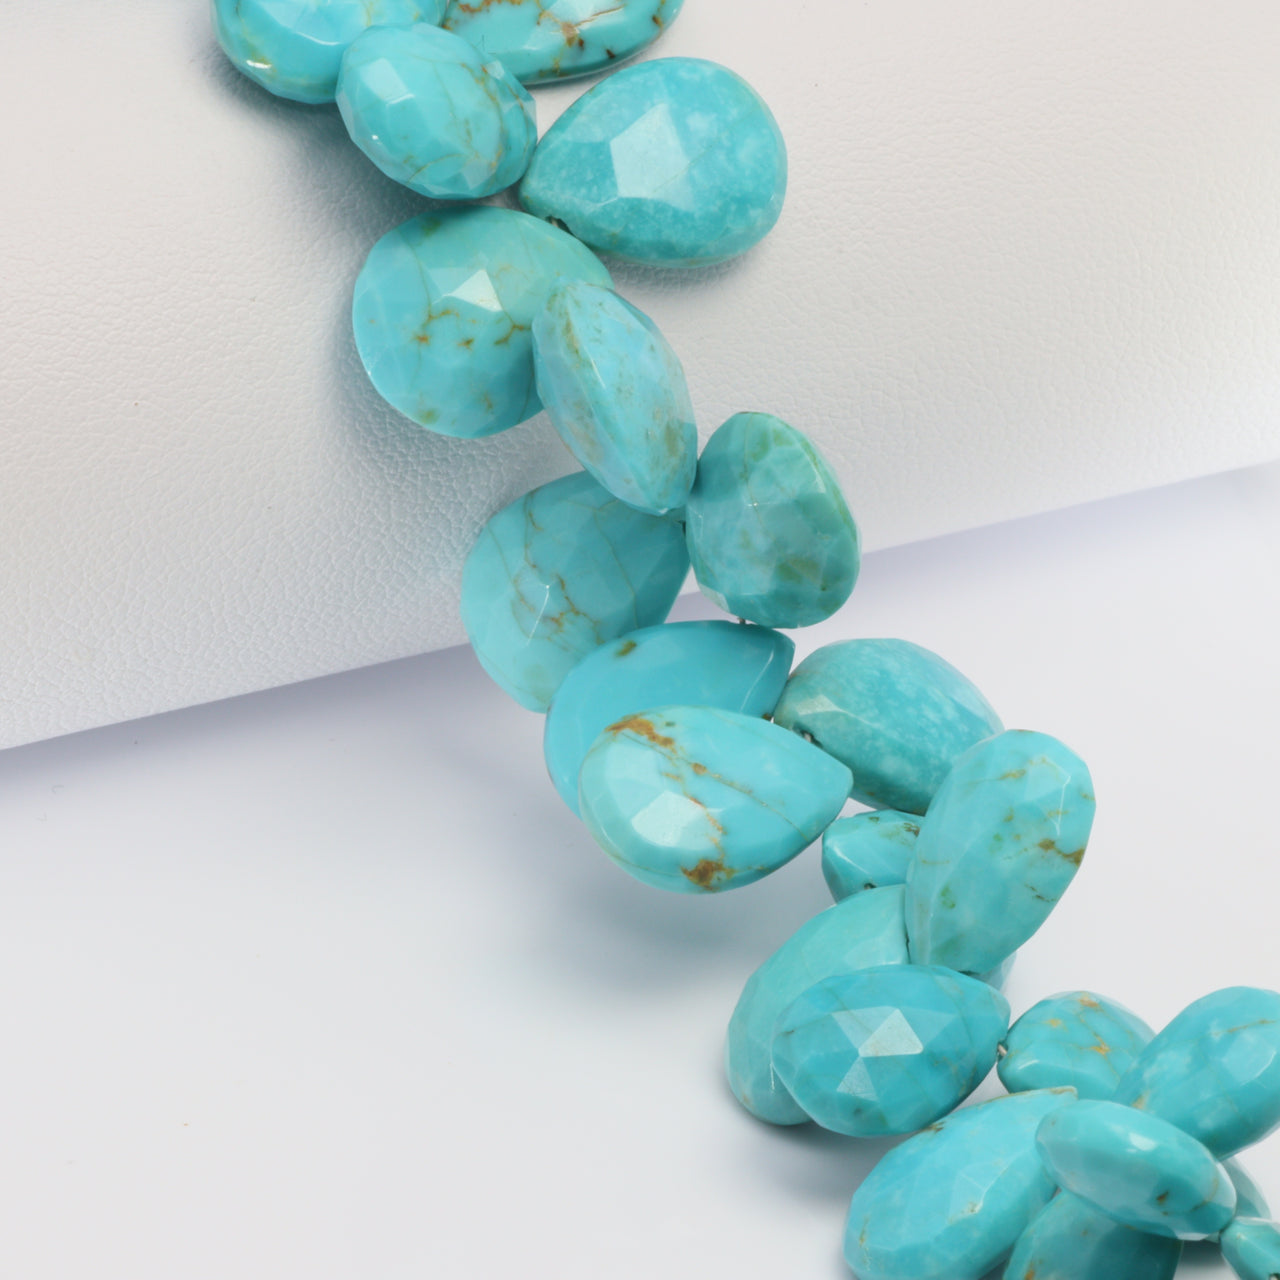 Natural Blue Turquoise 13x9mm Faceted Pear Shaped Briolettes